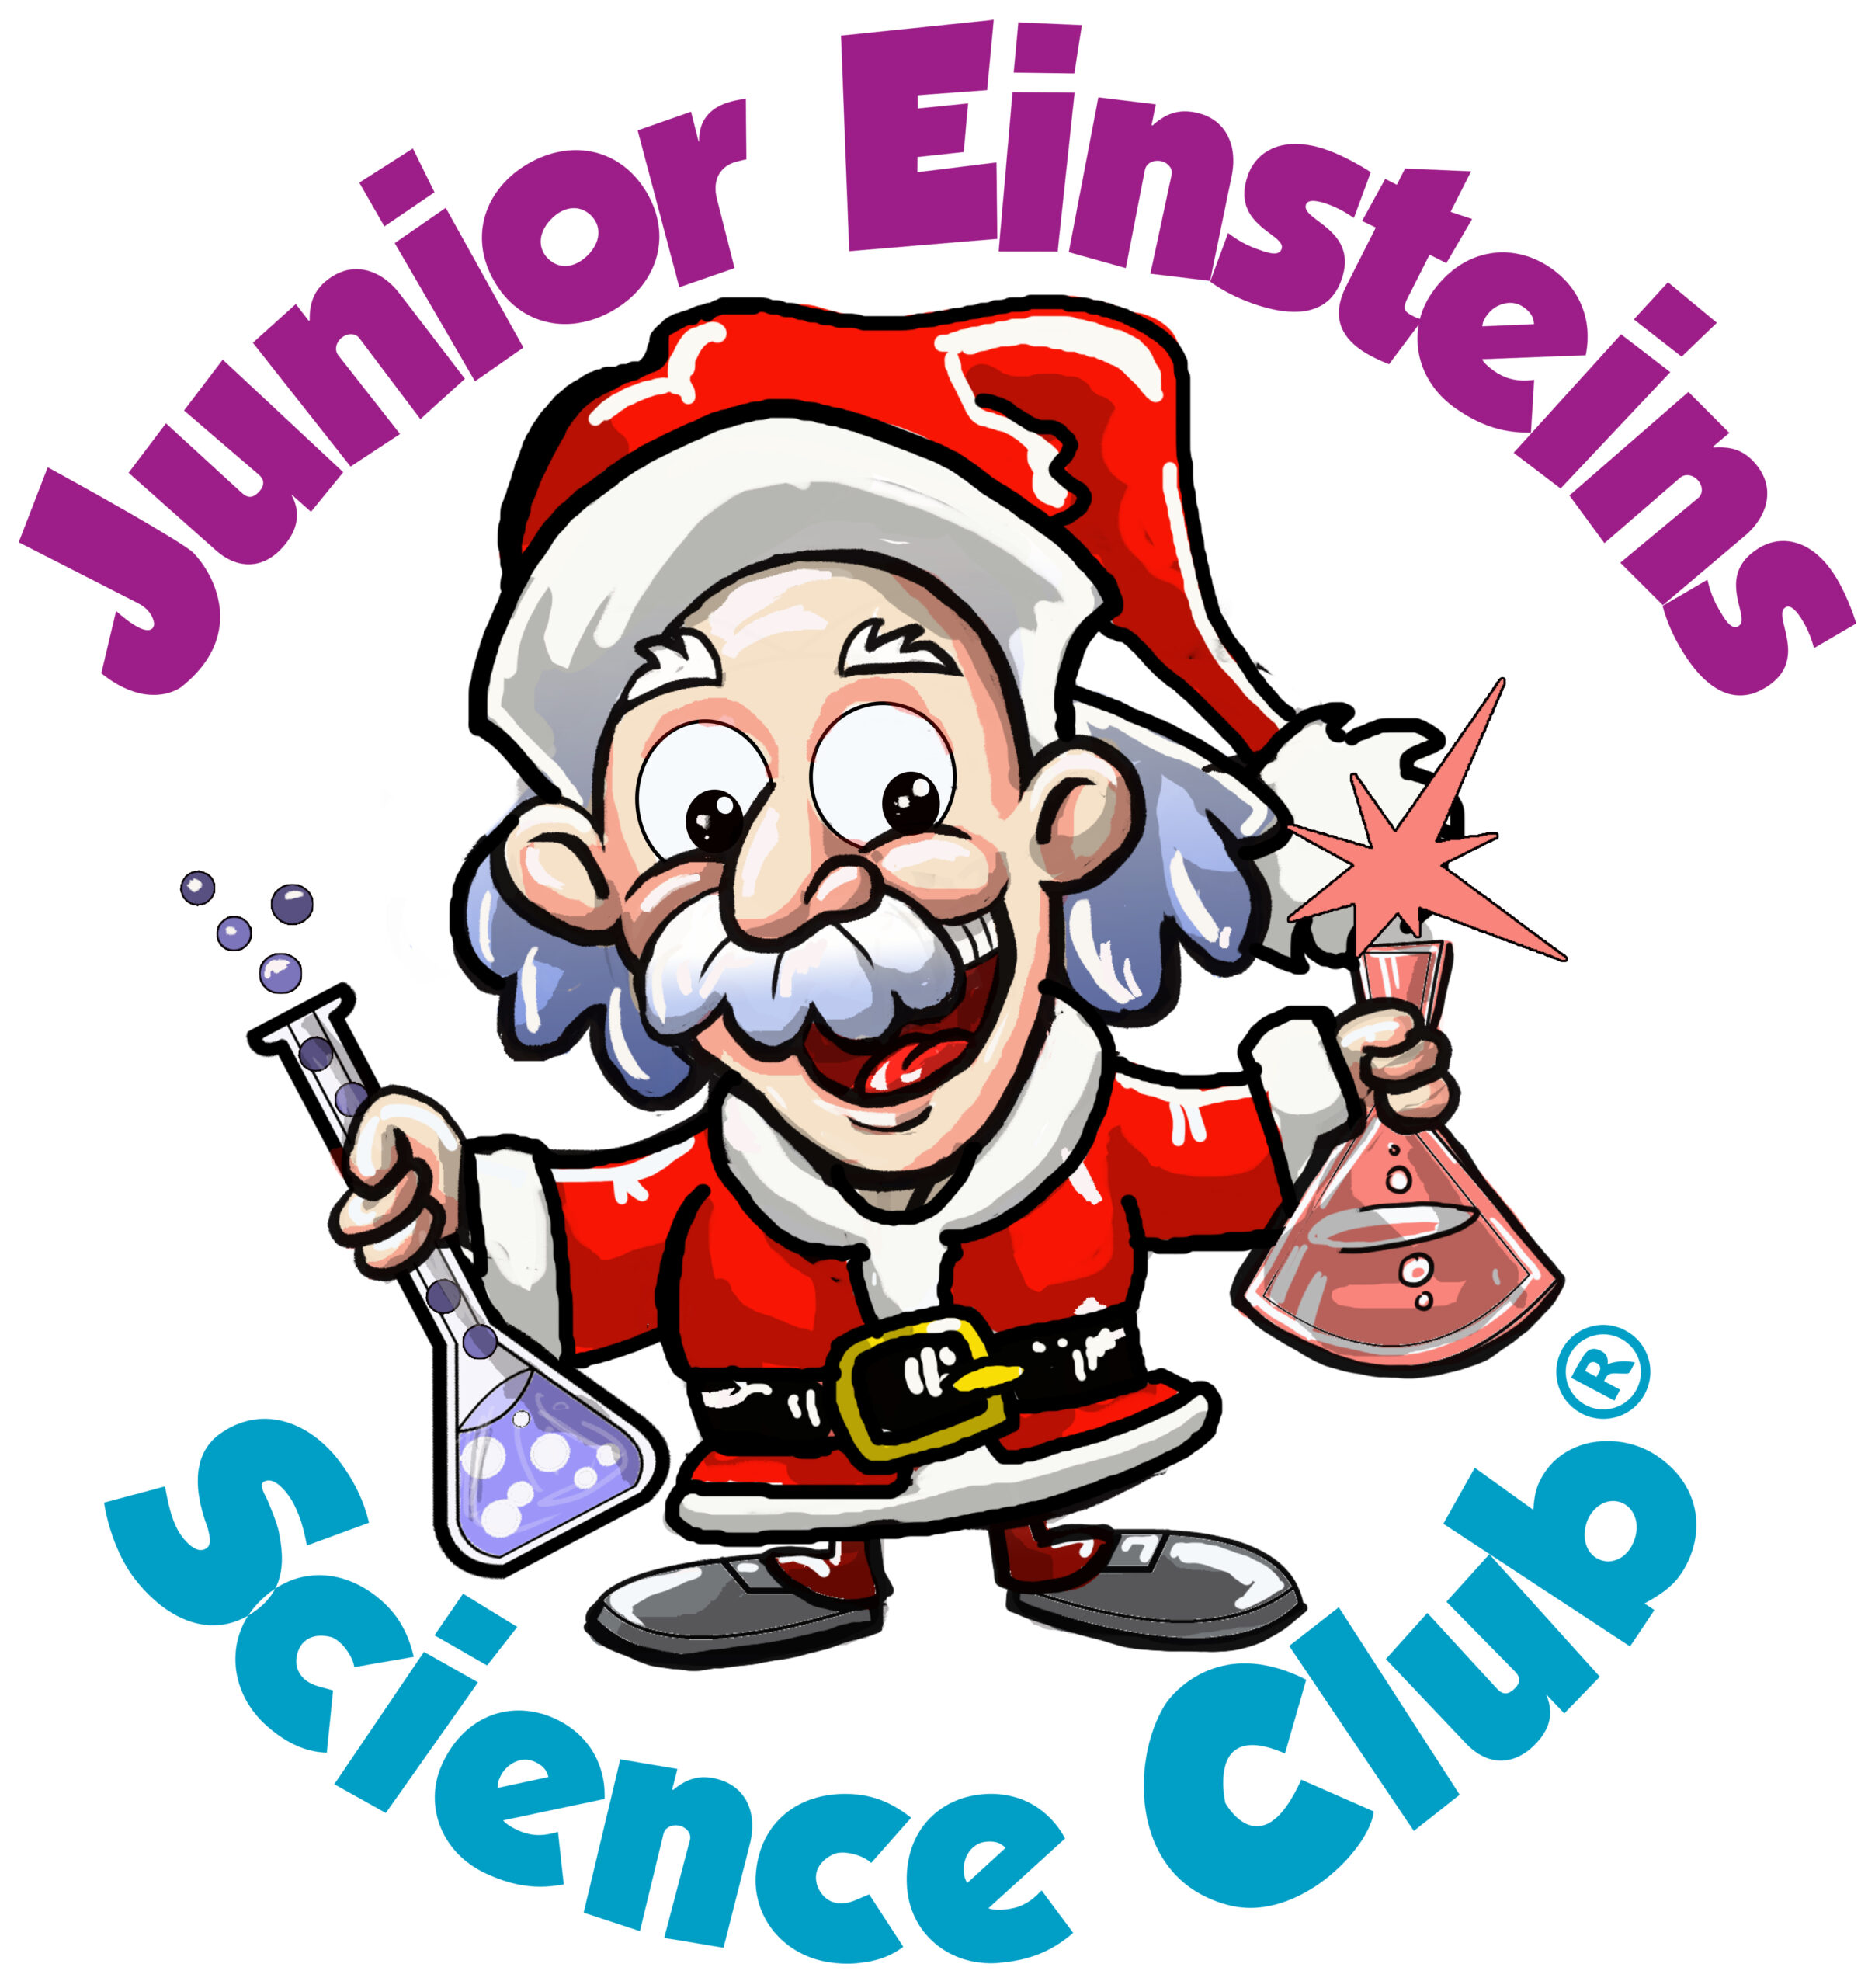 Bray Wicklow Christmas Science Camp for kids at Festina Lente, Bray (Saturday 28th December from 9:30am-1:30pm)